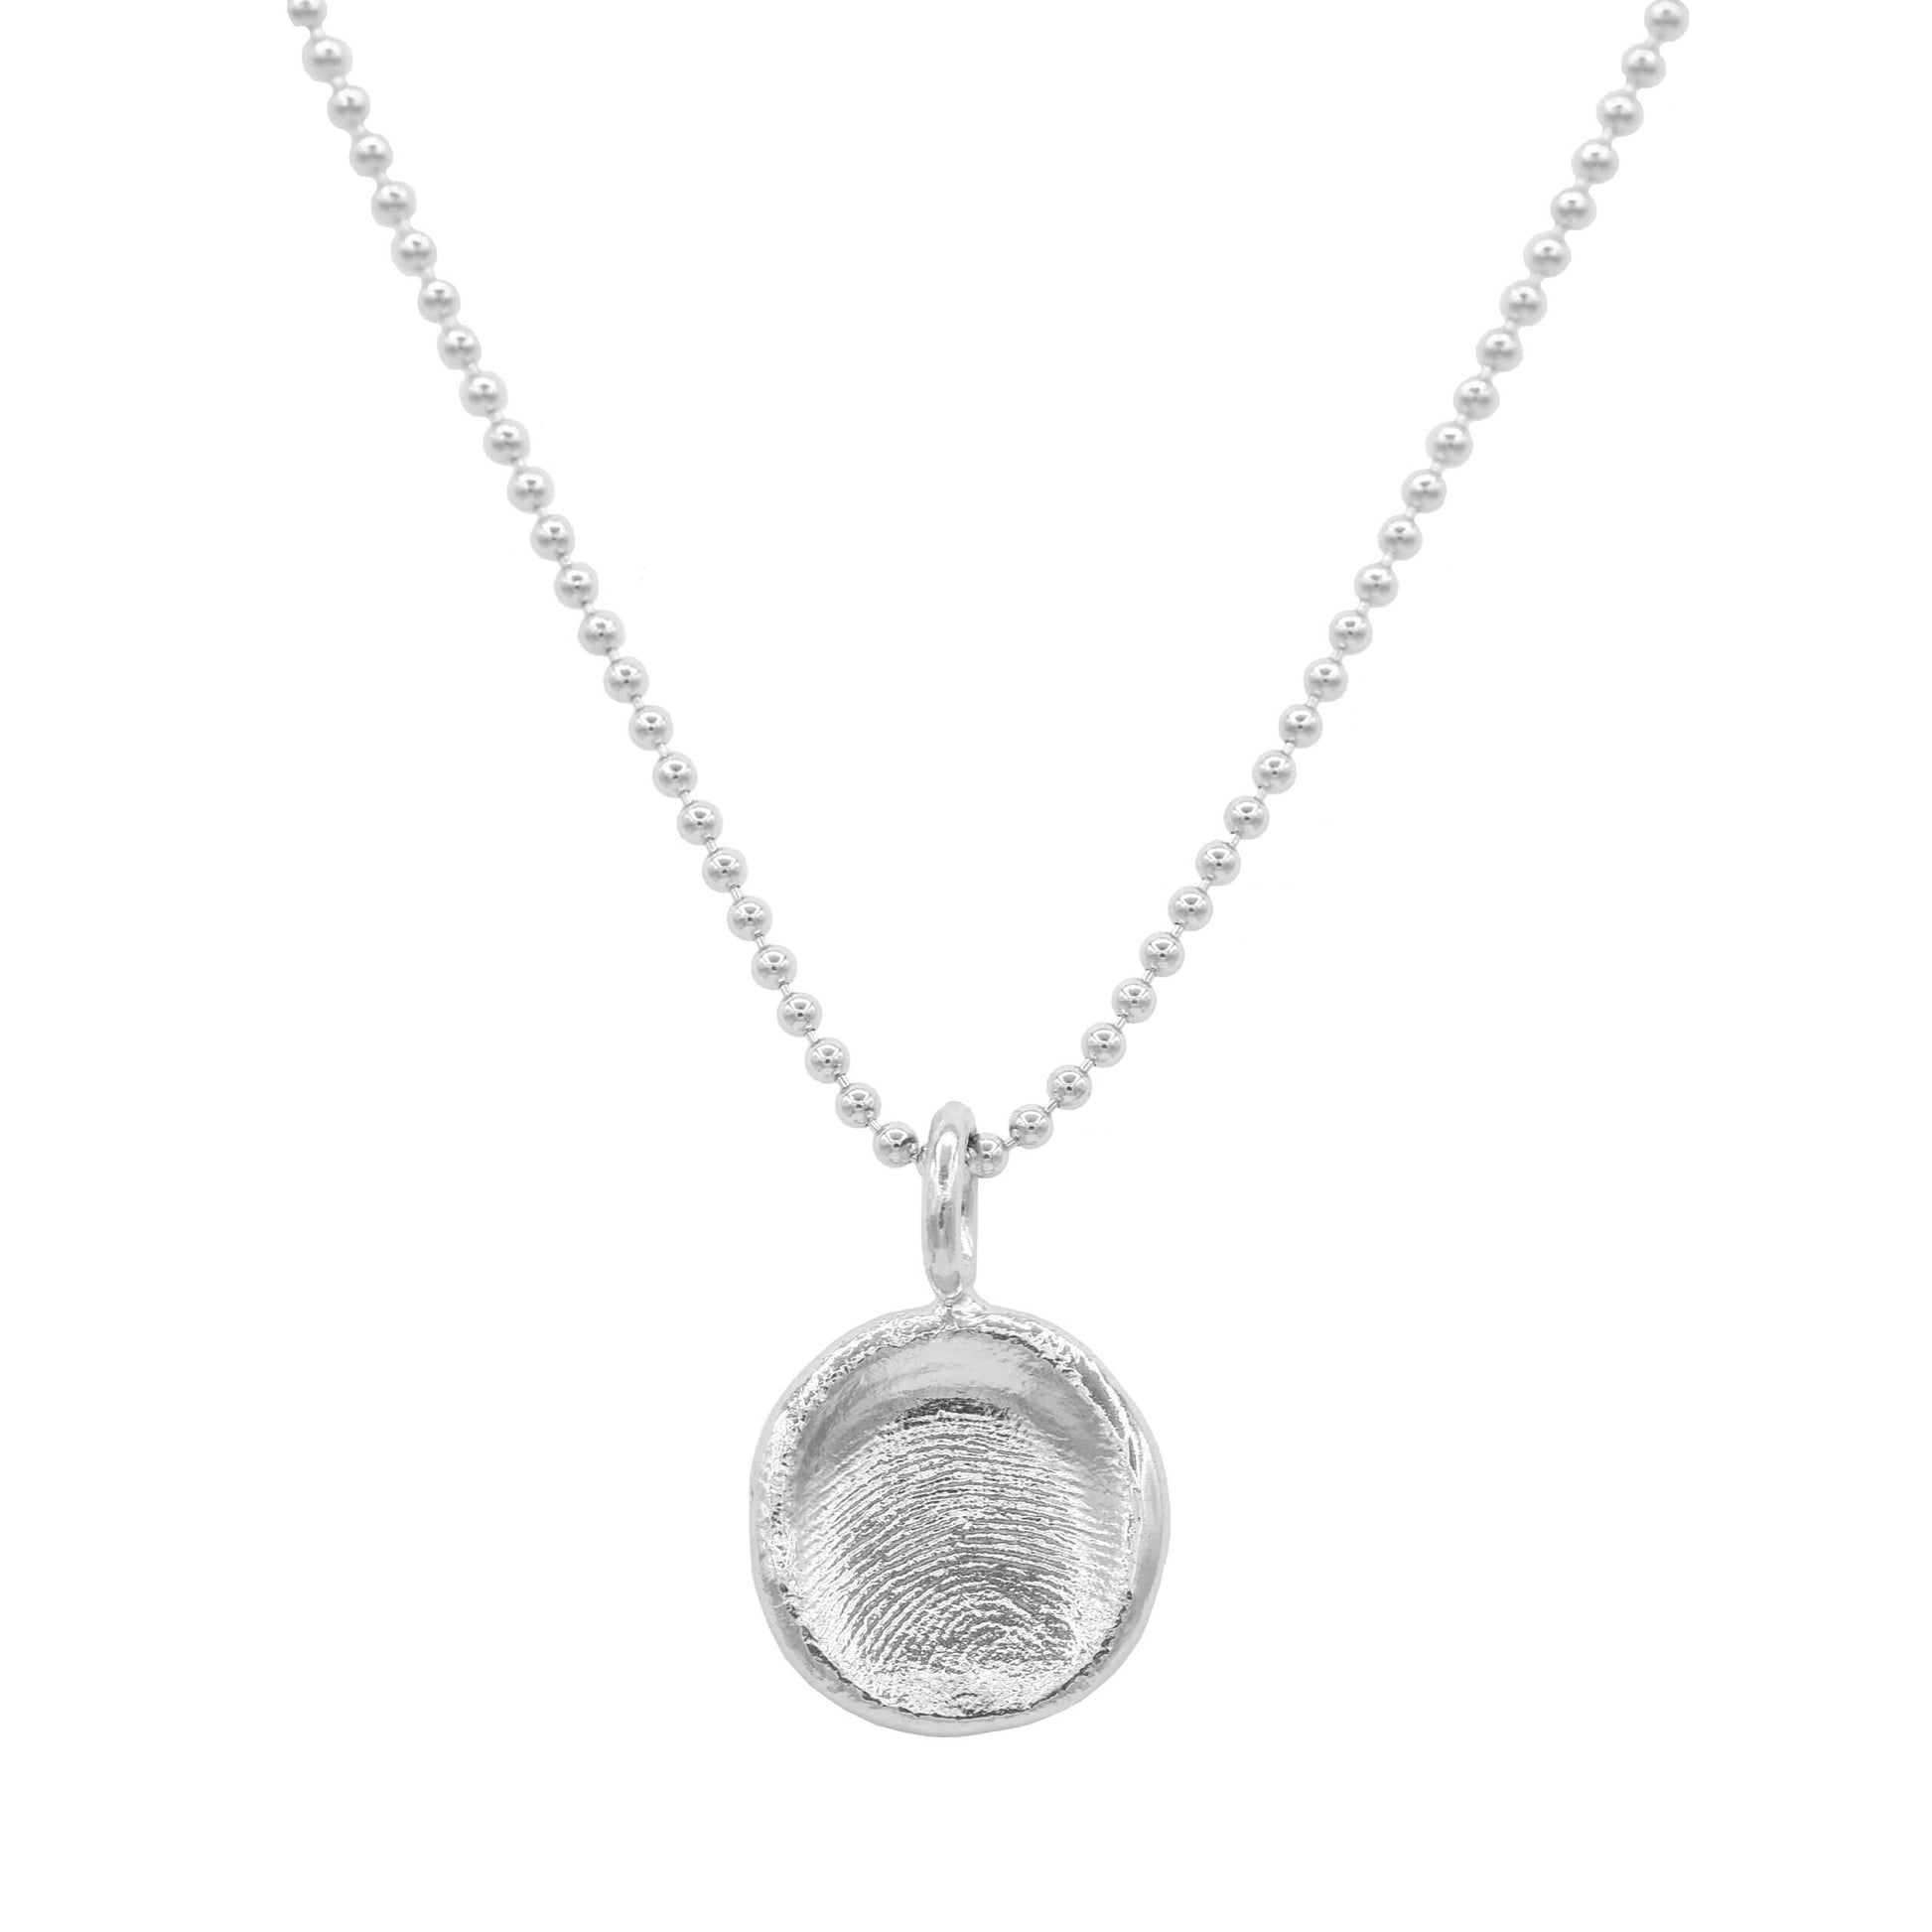 Ball Chain Fingerprint Necklace in sterling silver